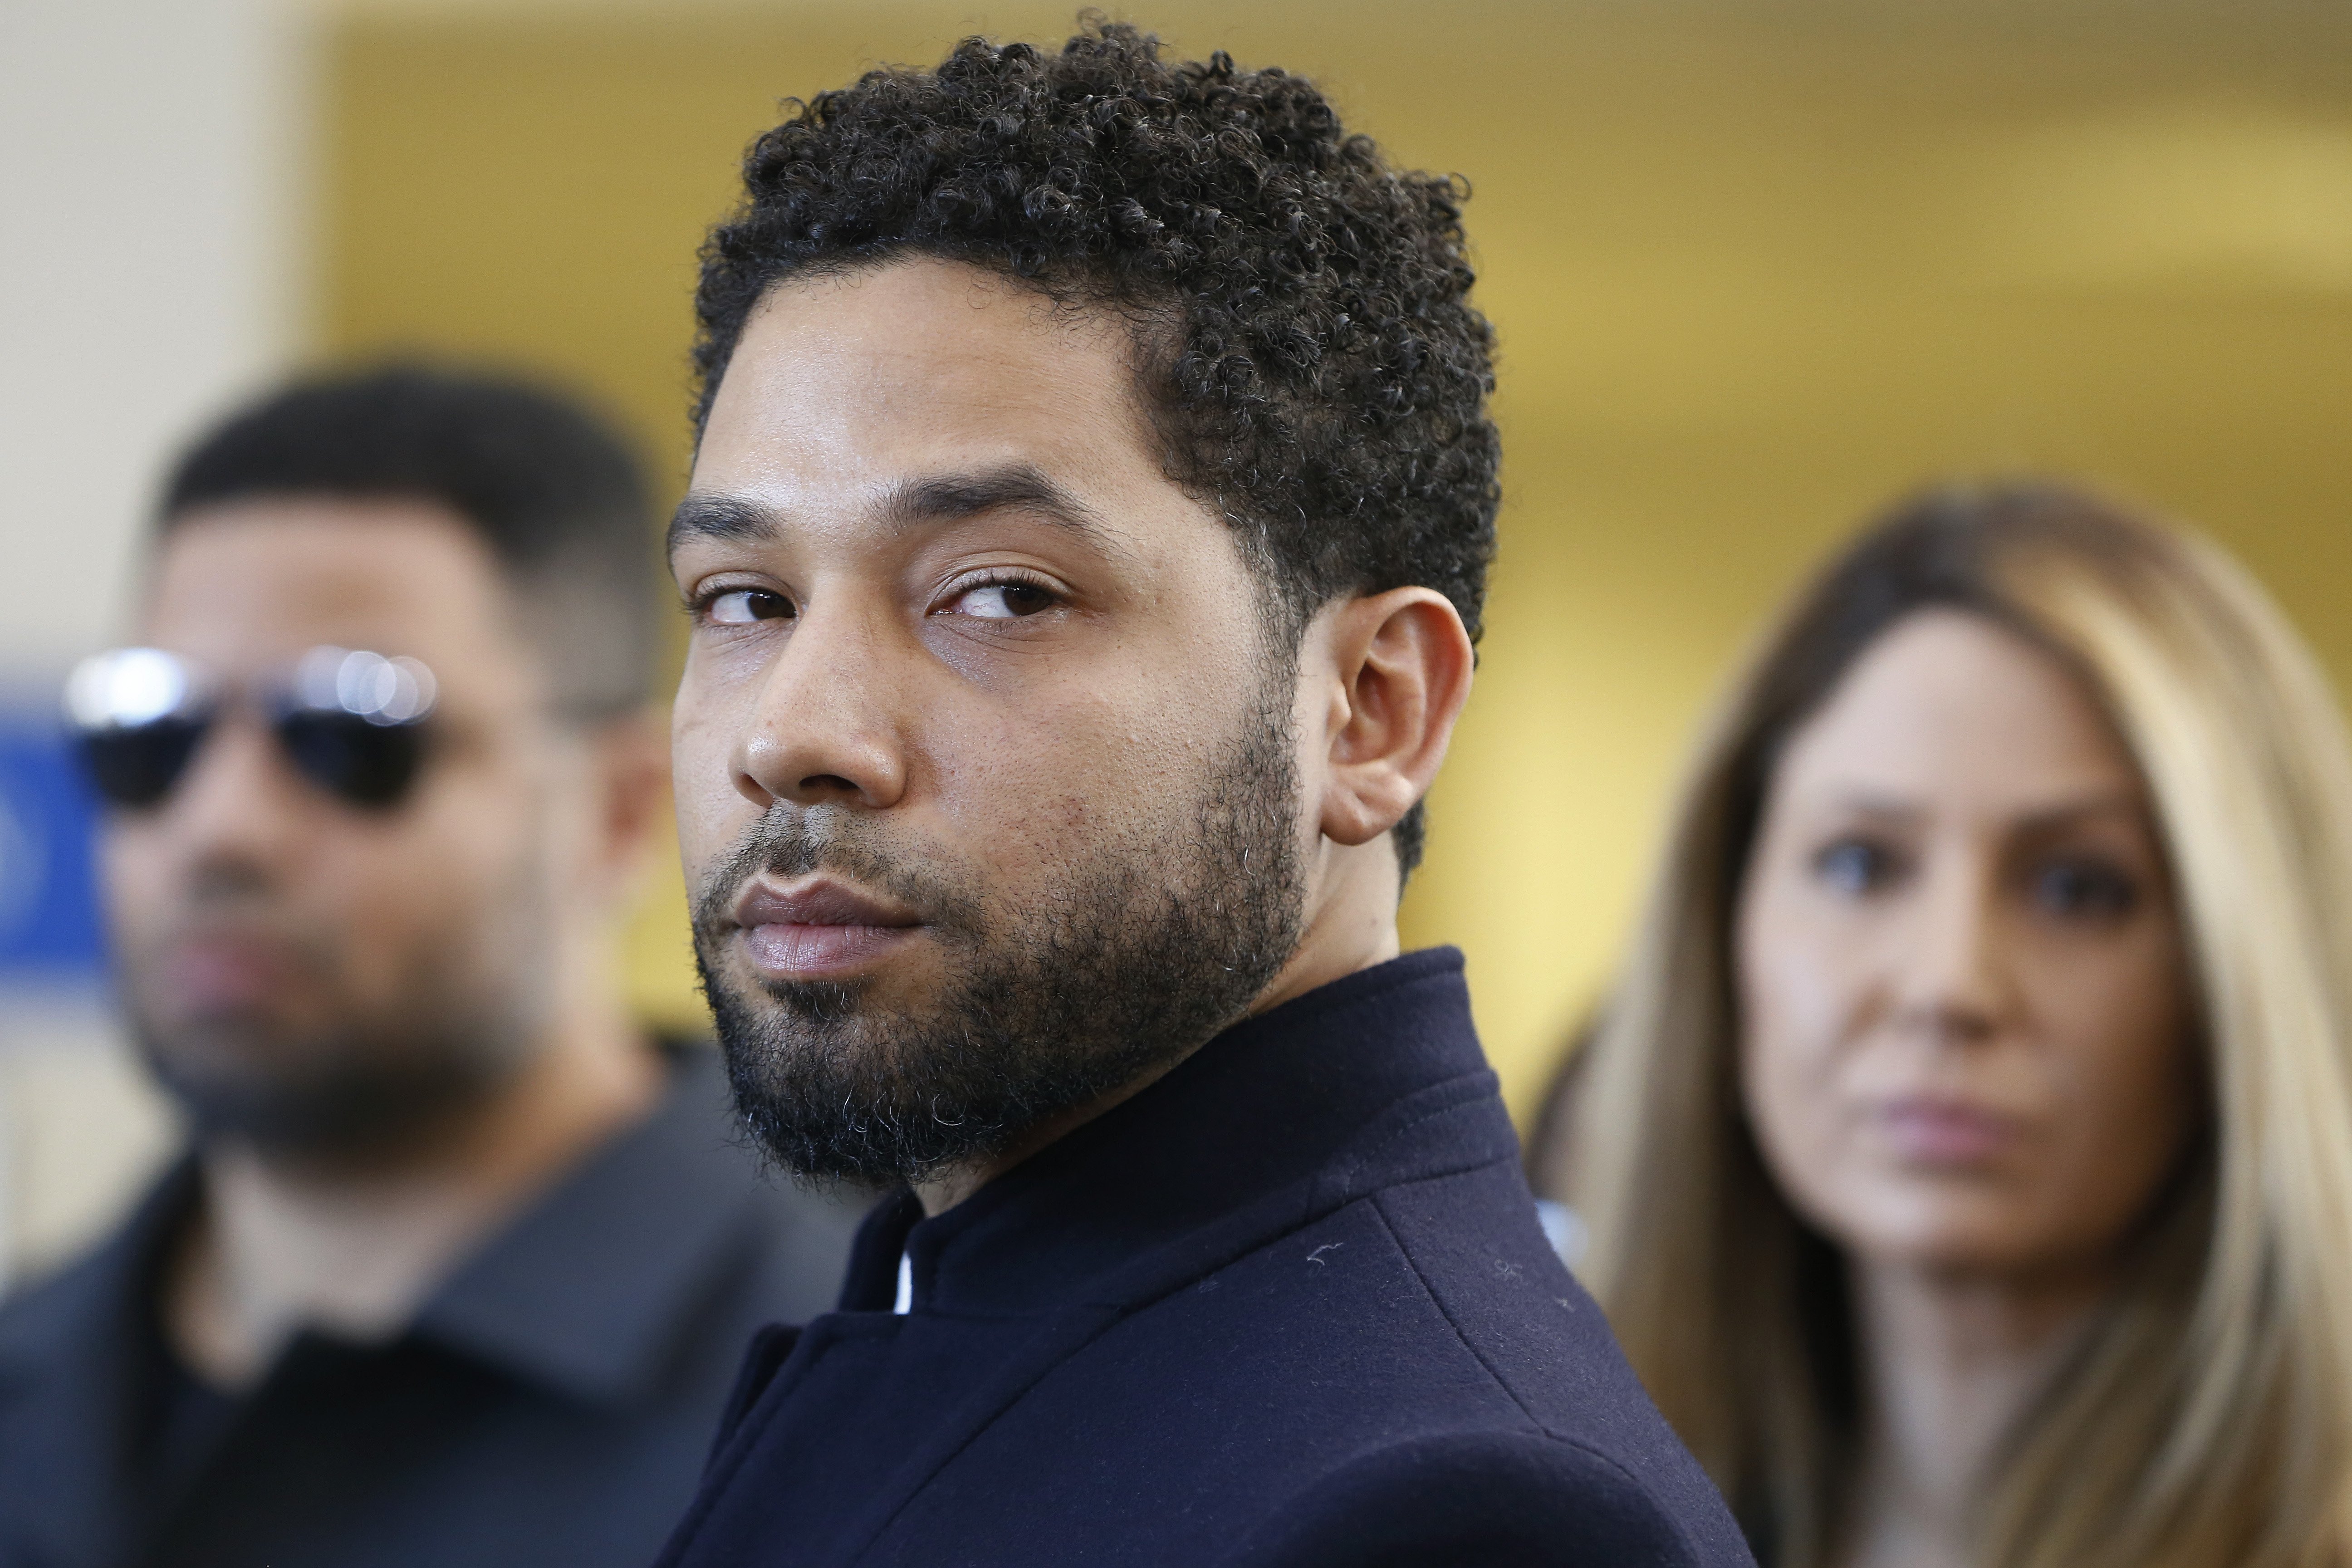 Jussie Smollett after his court appearance at Leighton Courthouse on March 26, 2019. | Photo: GettyImages